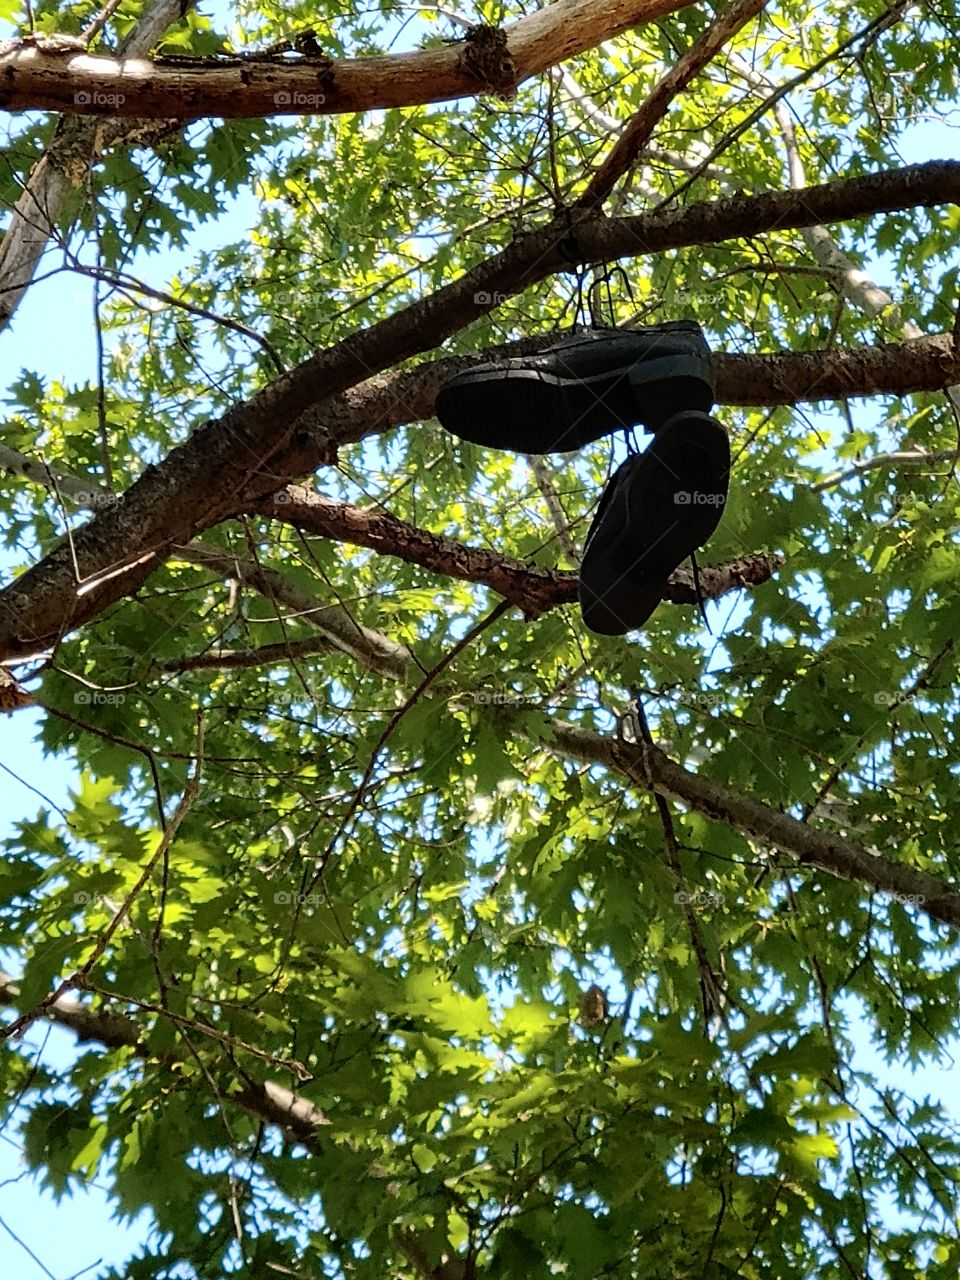 shoes in a tree